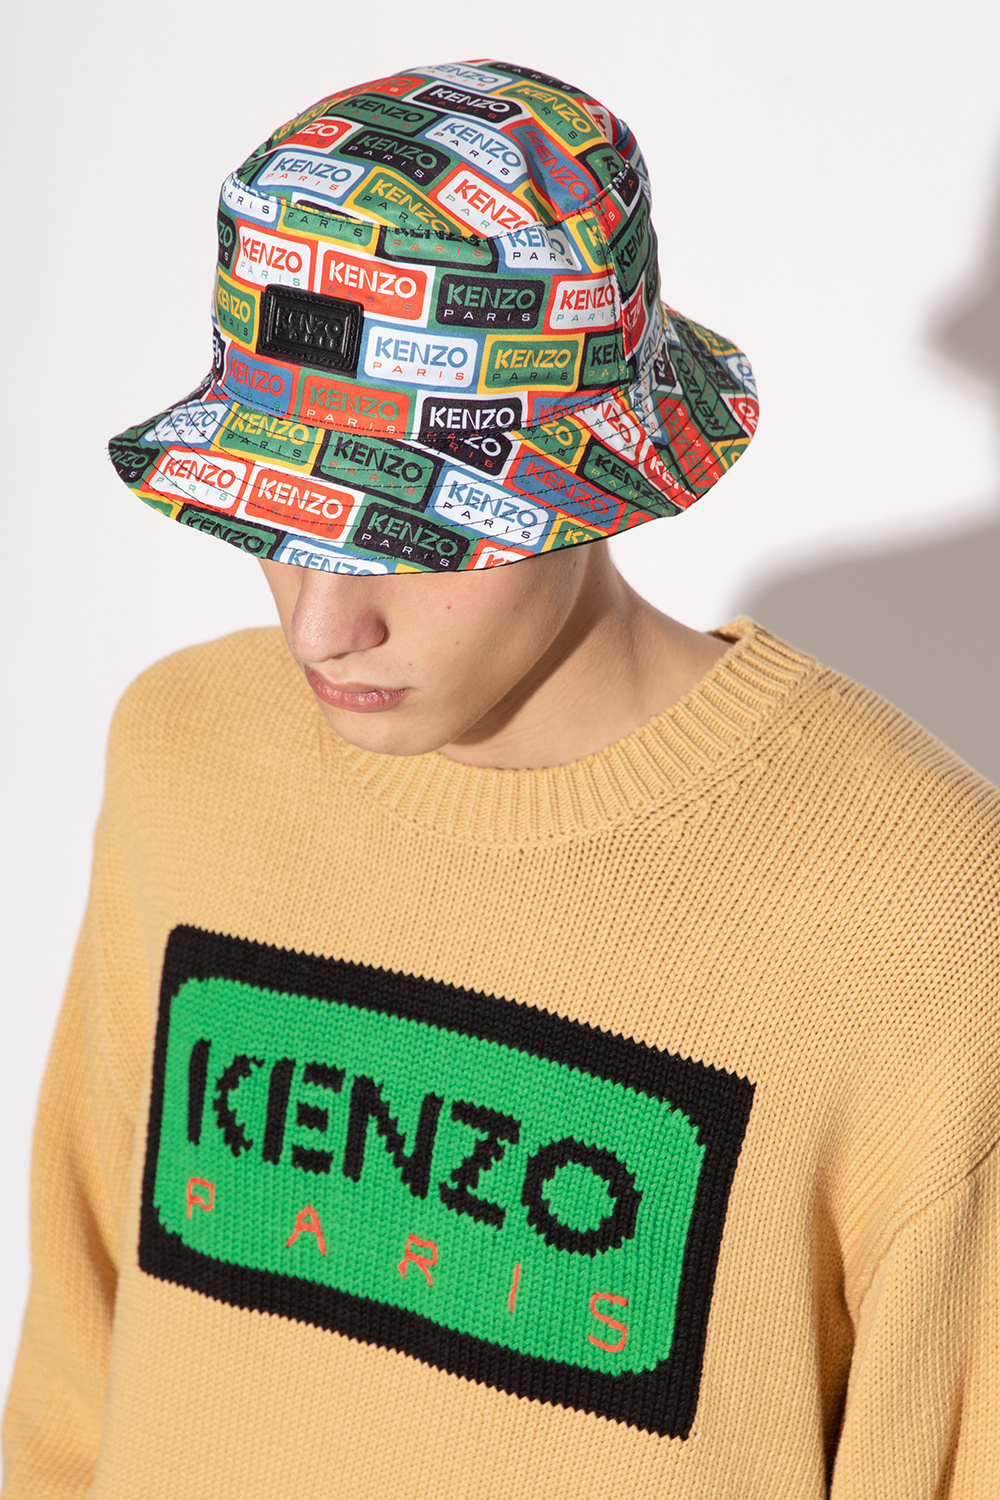 Kenzo Girl Power graphics make this fun pom hat Quaxar an essential winter hat Quaxar for your favorite ski bunny